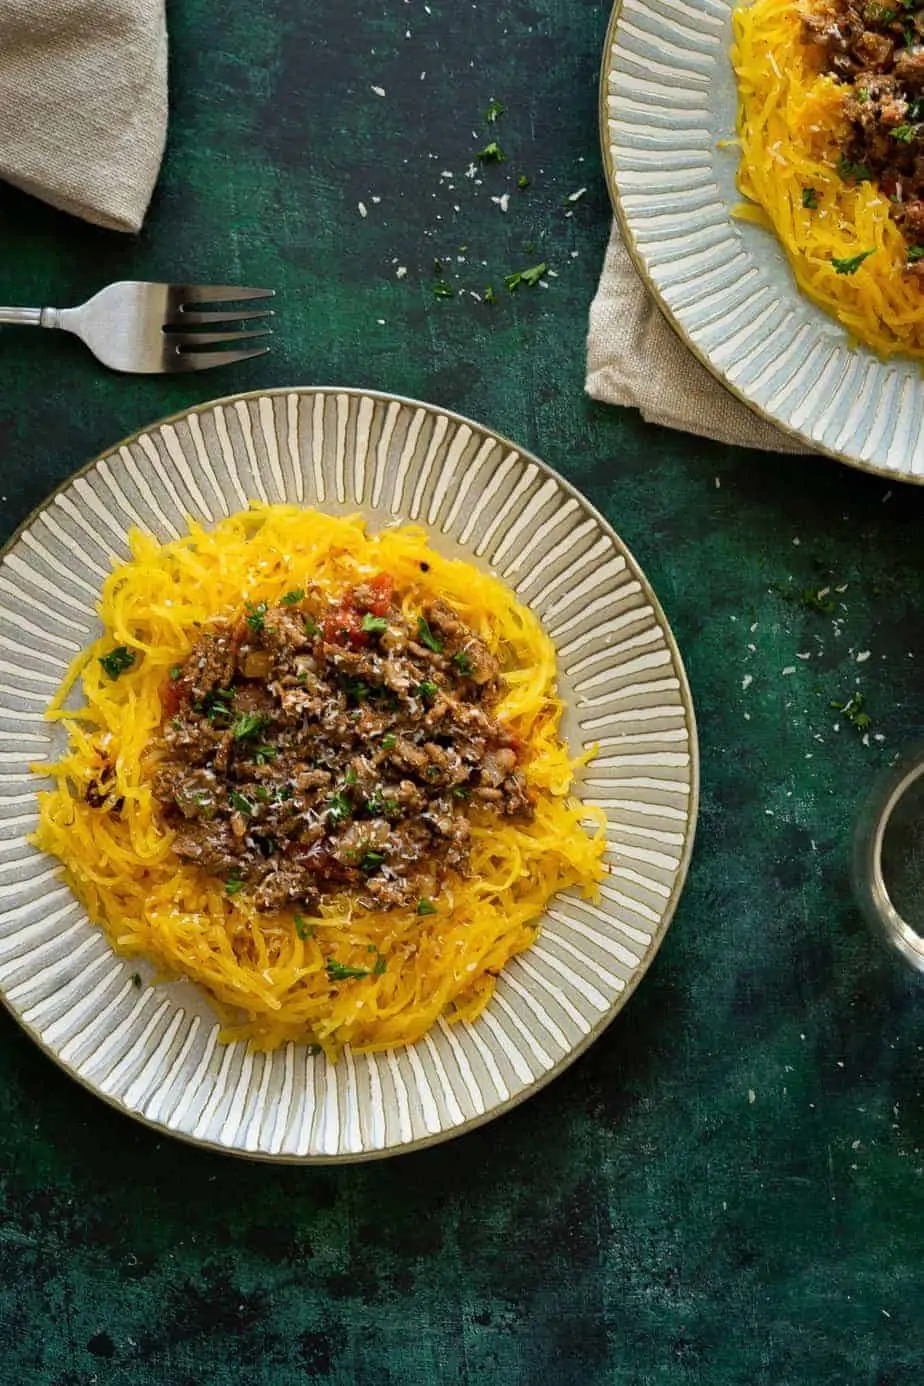 Serve squash with ground meat.